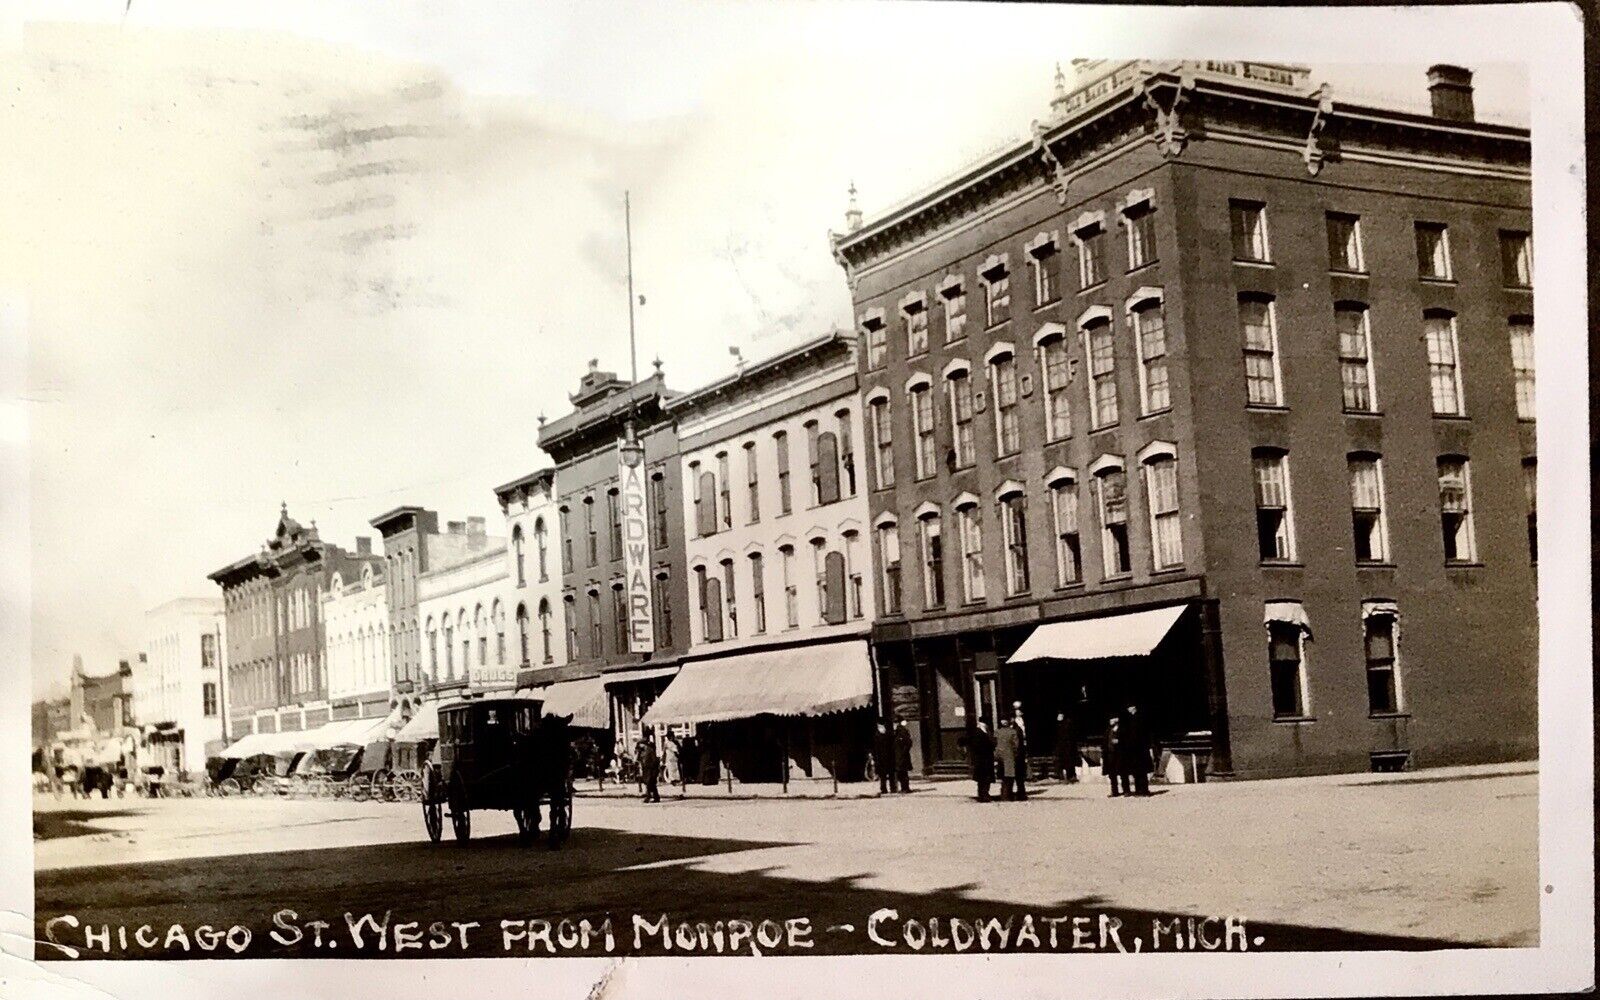 COLDWATER, MICH. Chicago St. West From Monroe Real Photo Antique Postcard 1911